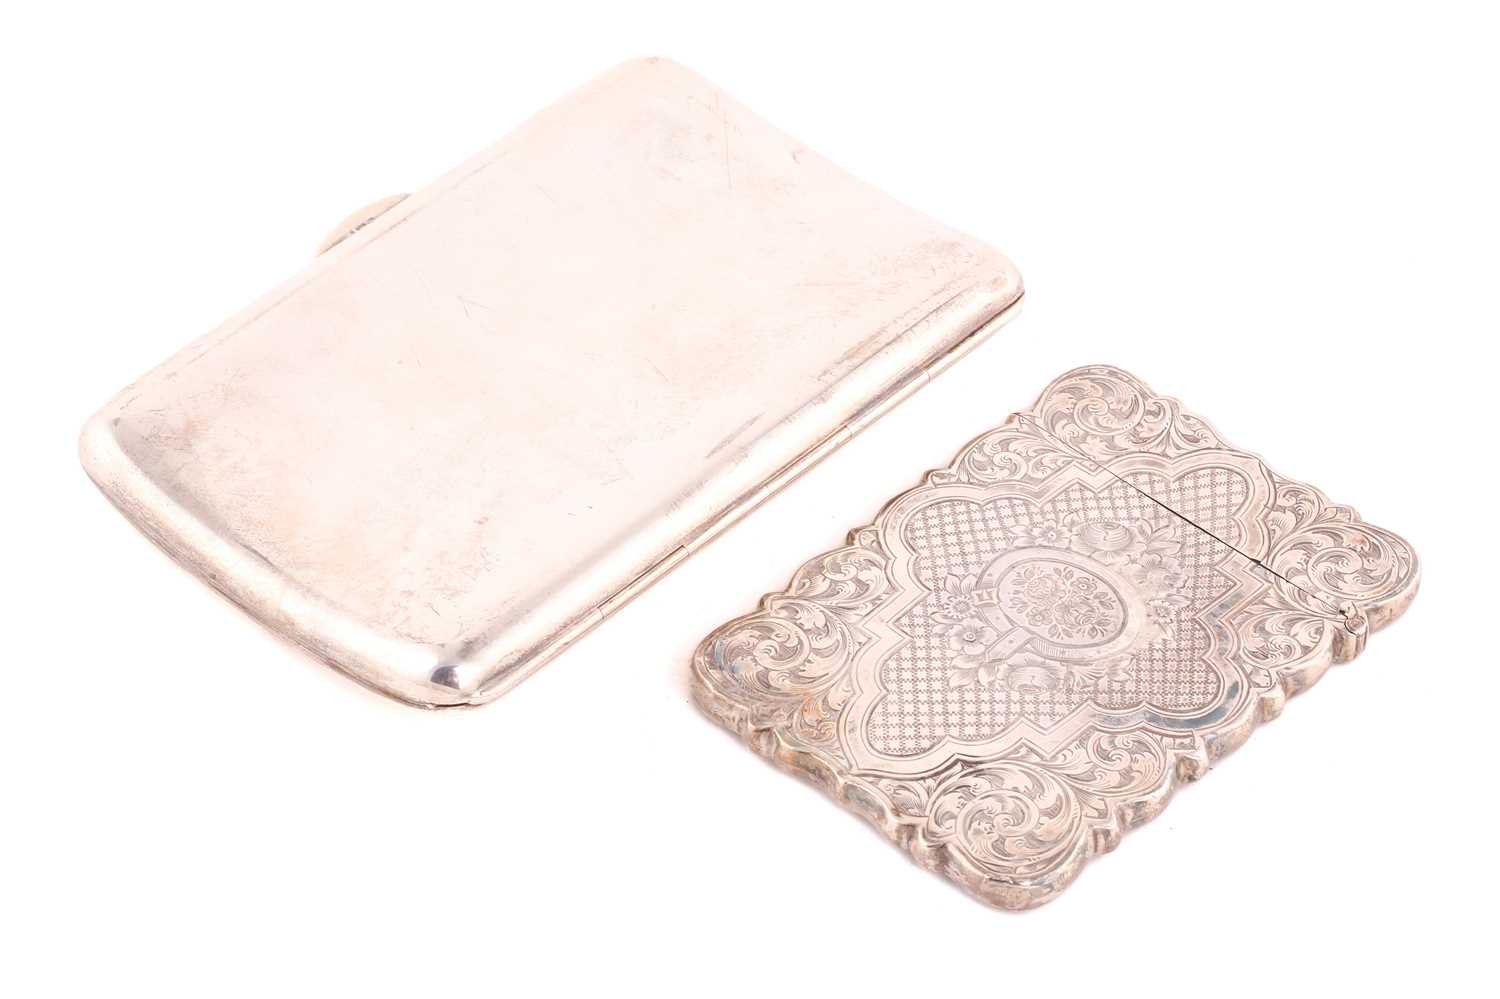 An Edward VII silver cigarette case, Chester 1900 by Colen Hewer Cheshire, with a gold-coloured - Image 2 of 9